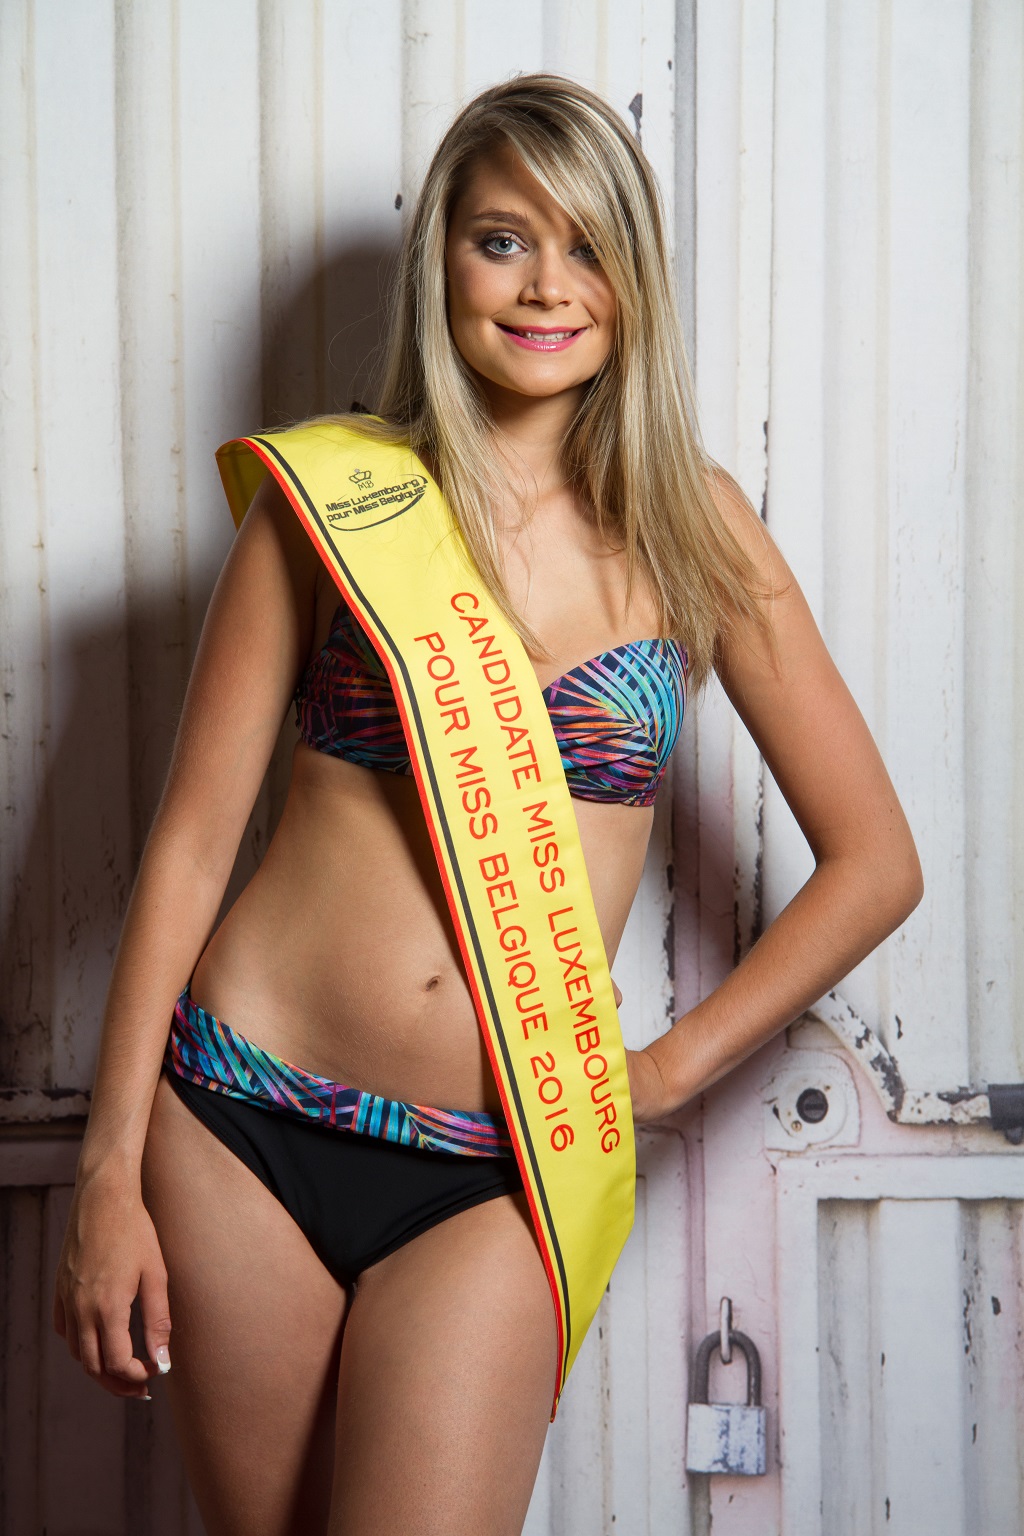 Miss Luxembourg 2015